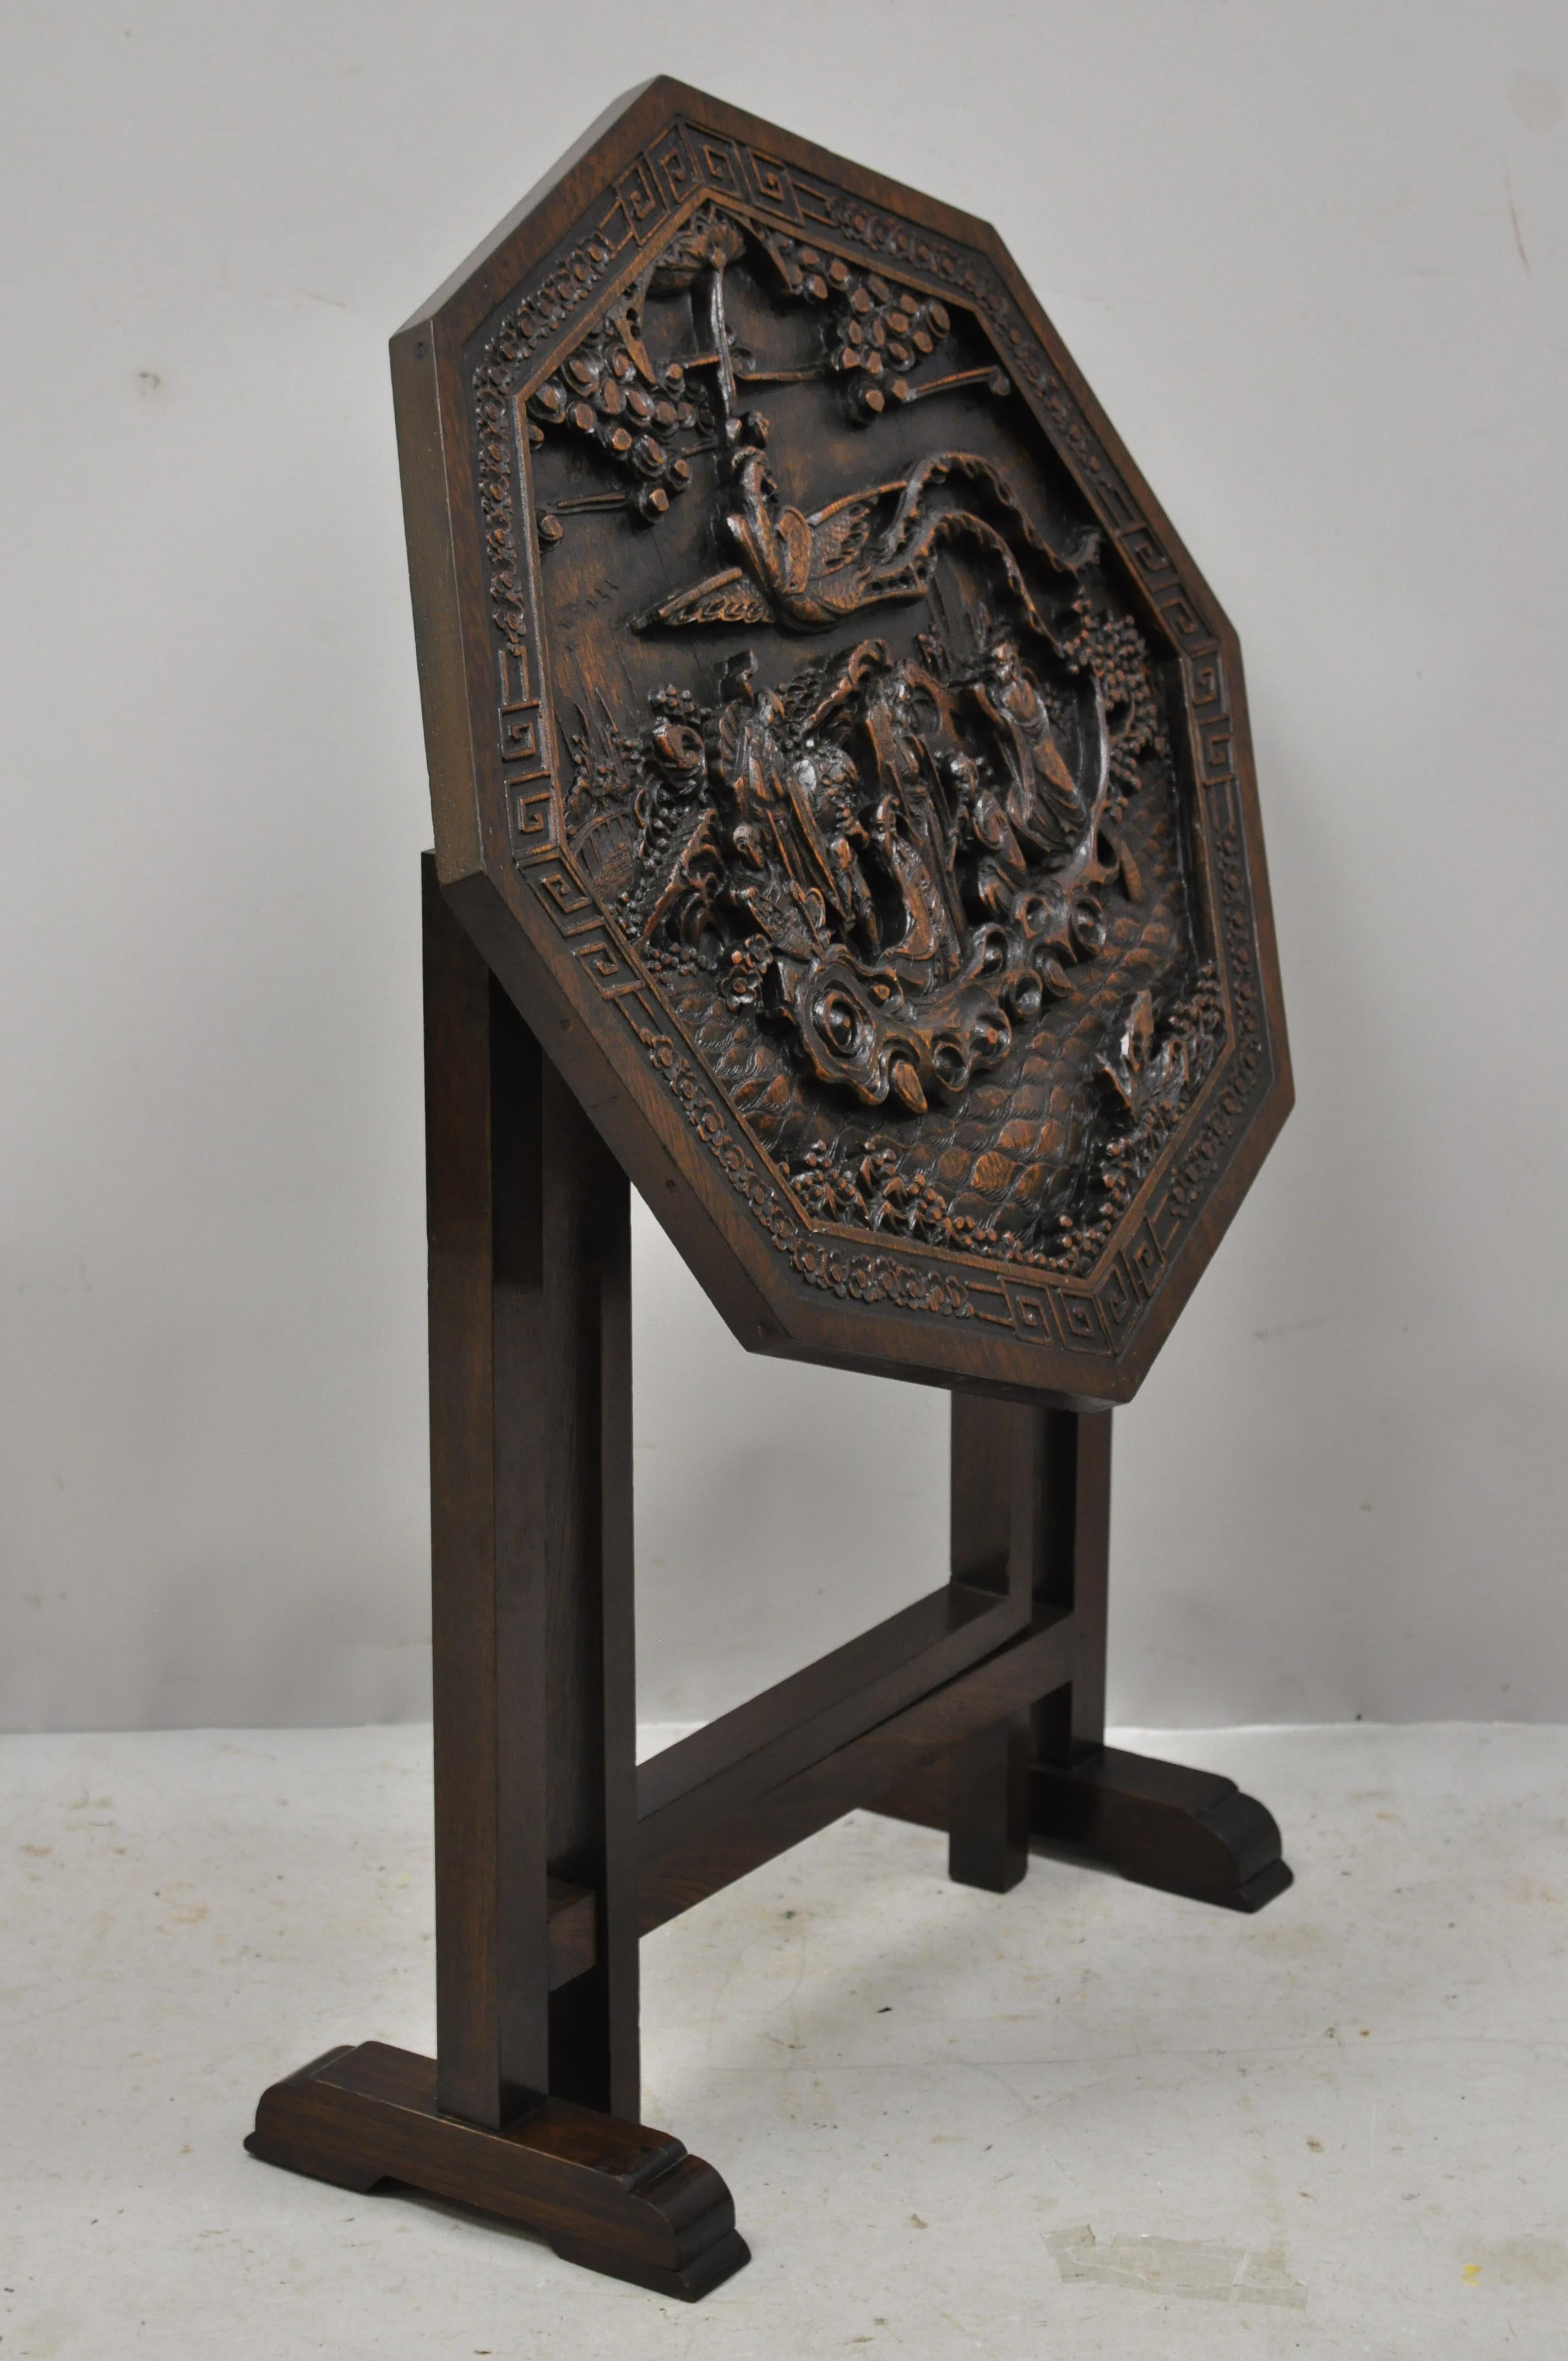 Antique Chinese carved hardwood folding gate leg table with figural carvings. Item features relief carved figural top, fold out base, flip top, solid wood construction, very nice vintage item, great style and form, circa mid-20th century.